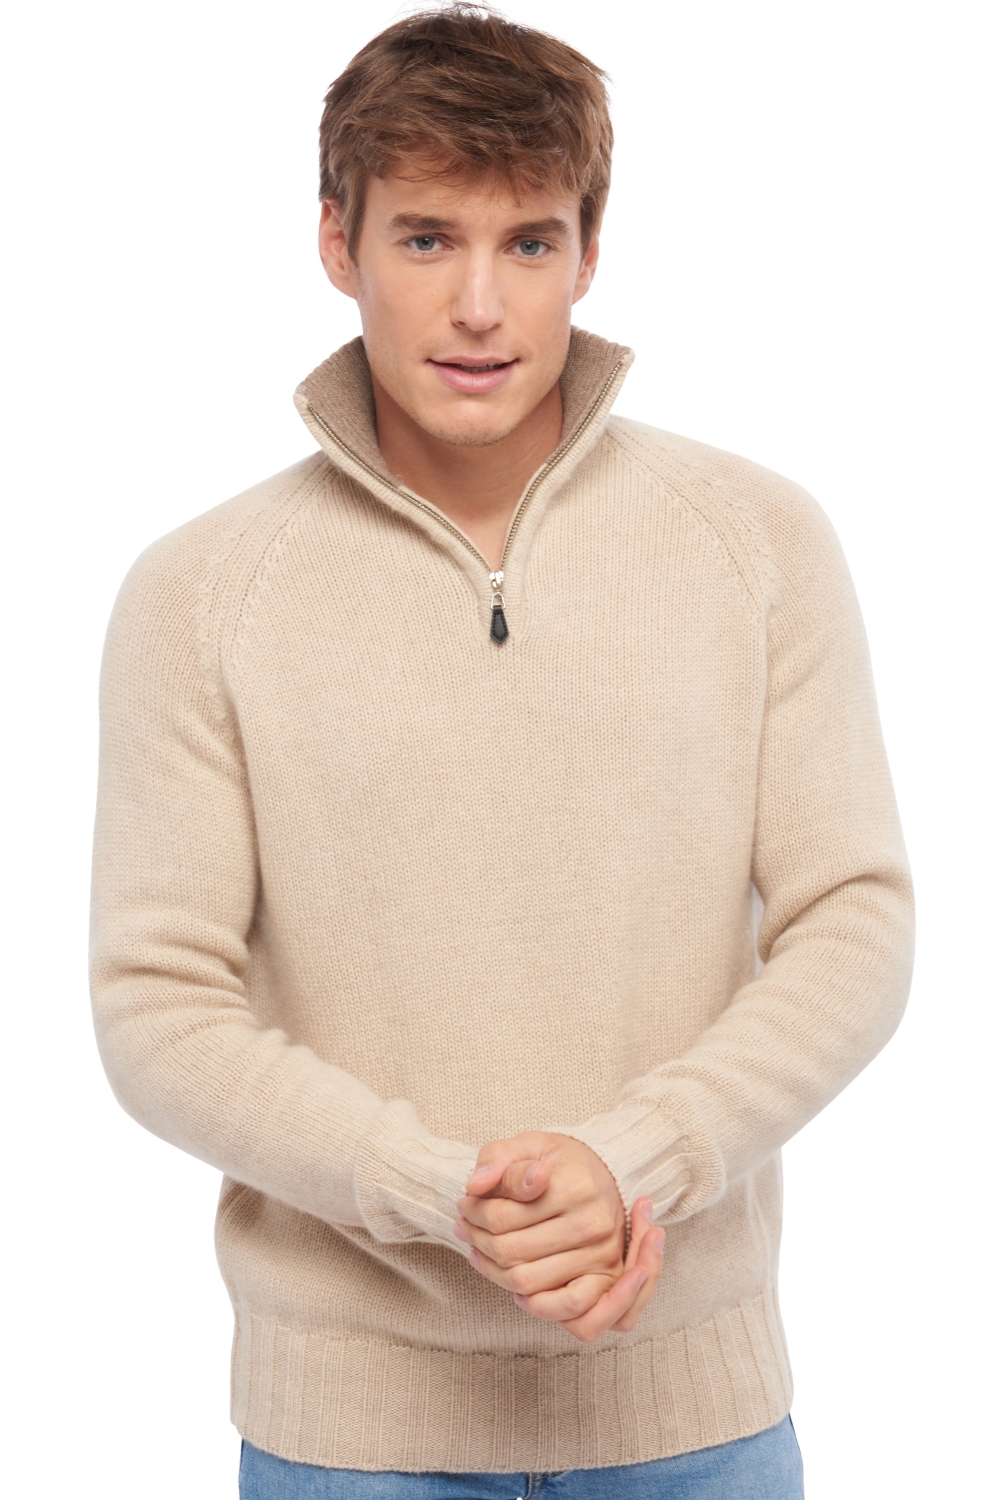 Cashmere uomo polo olivier natural beige natural brown m